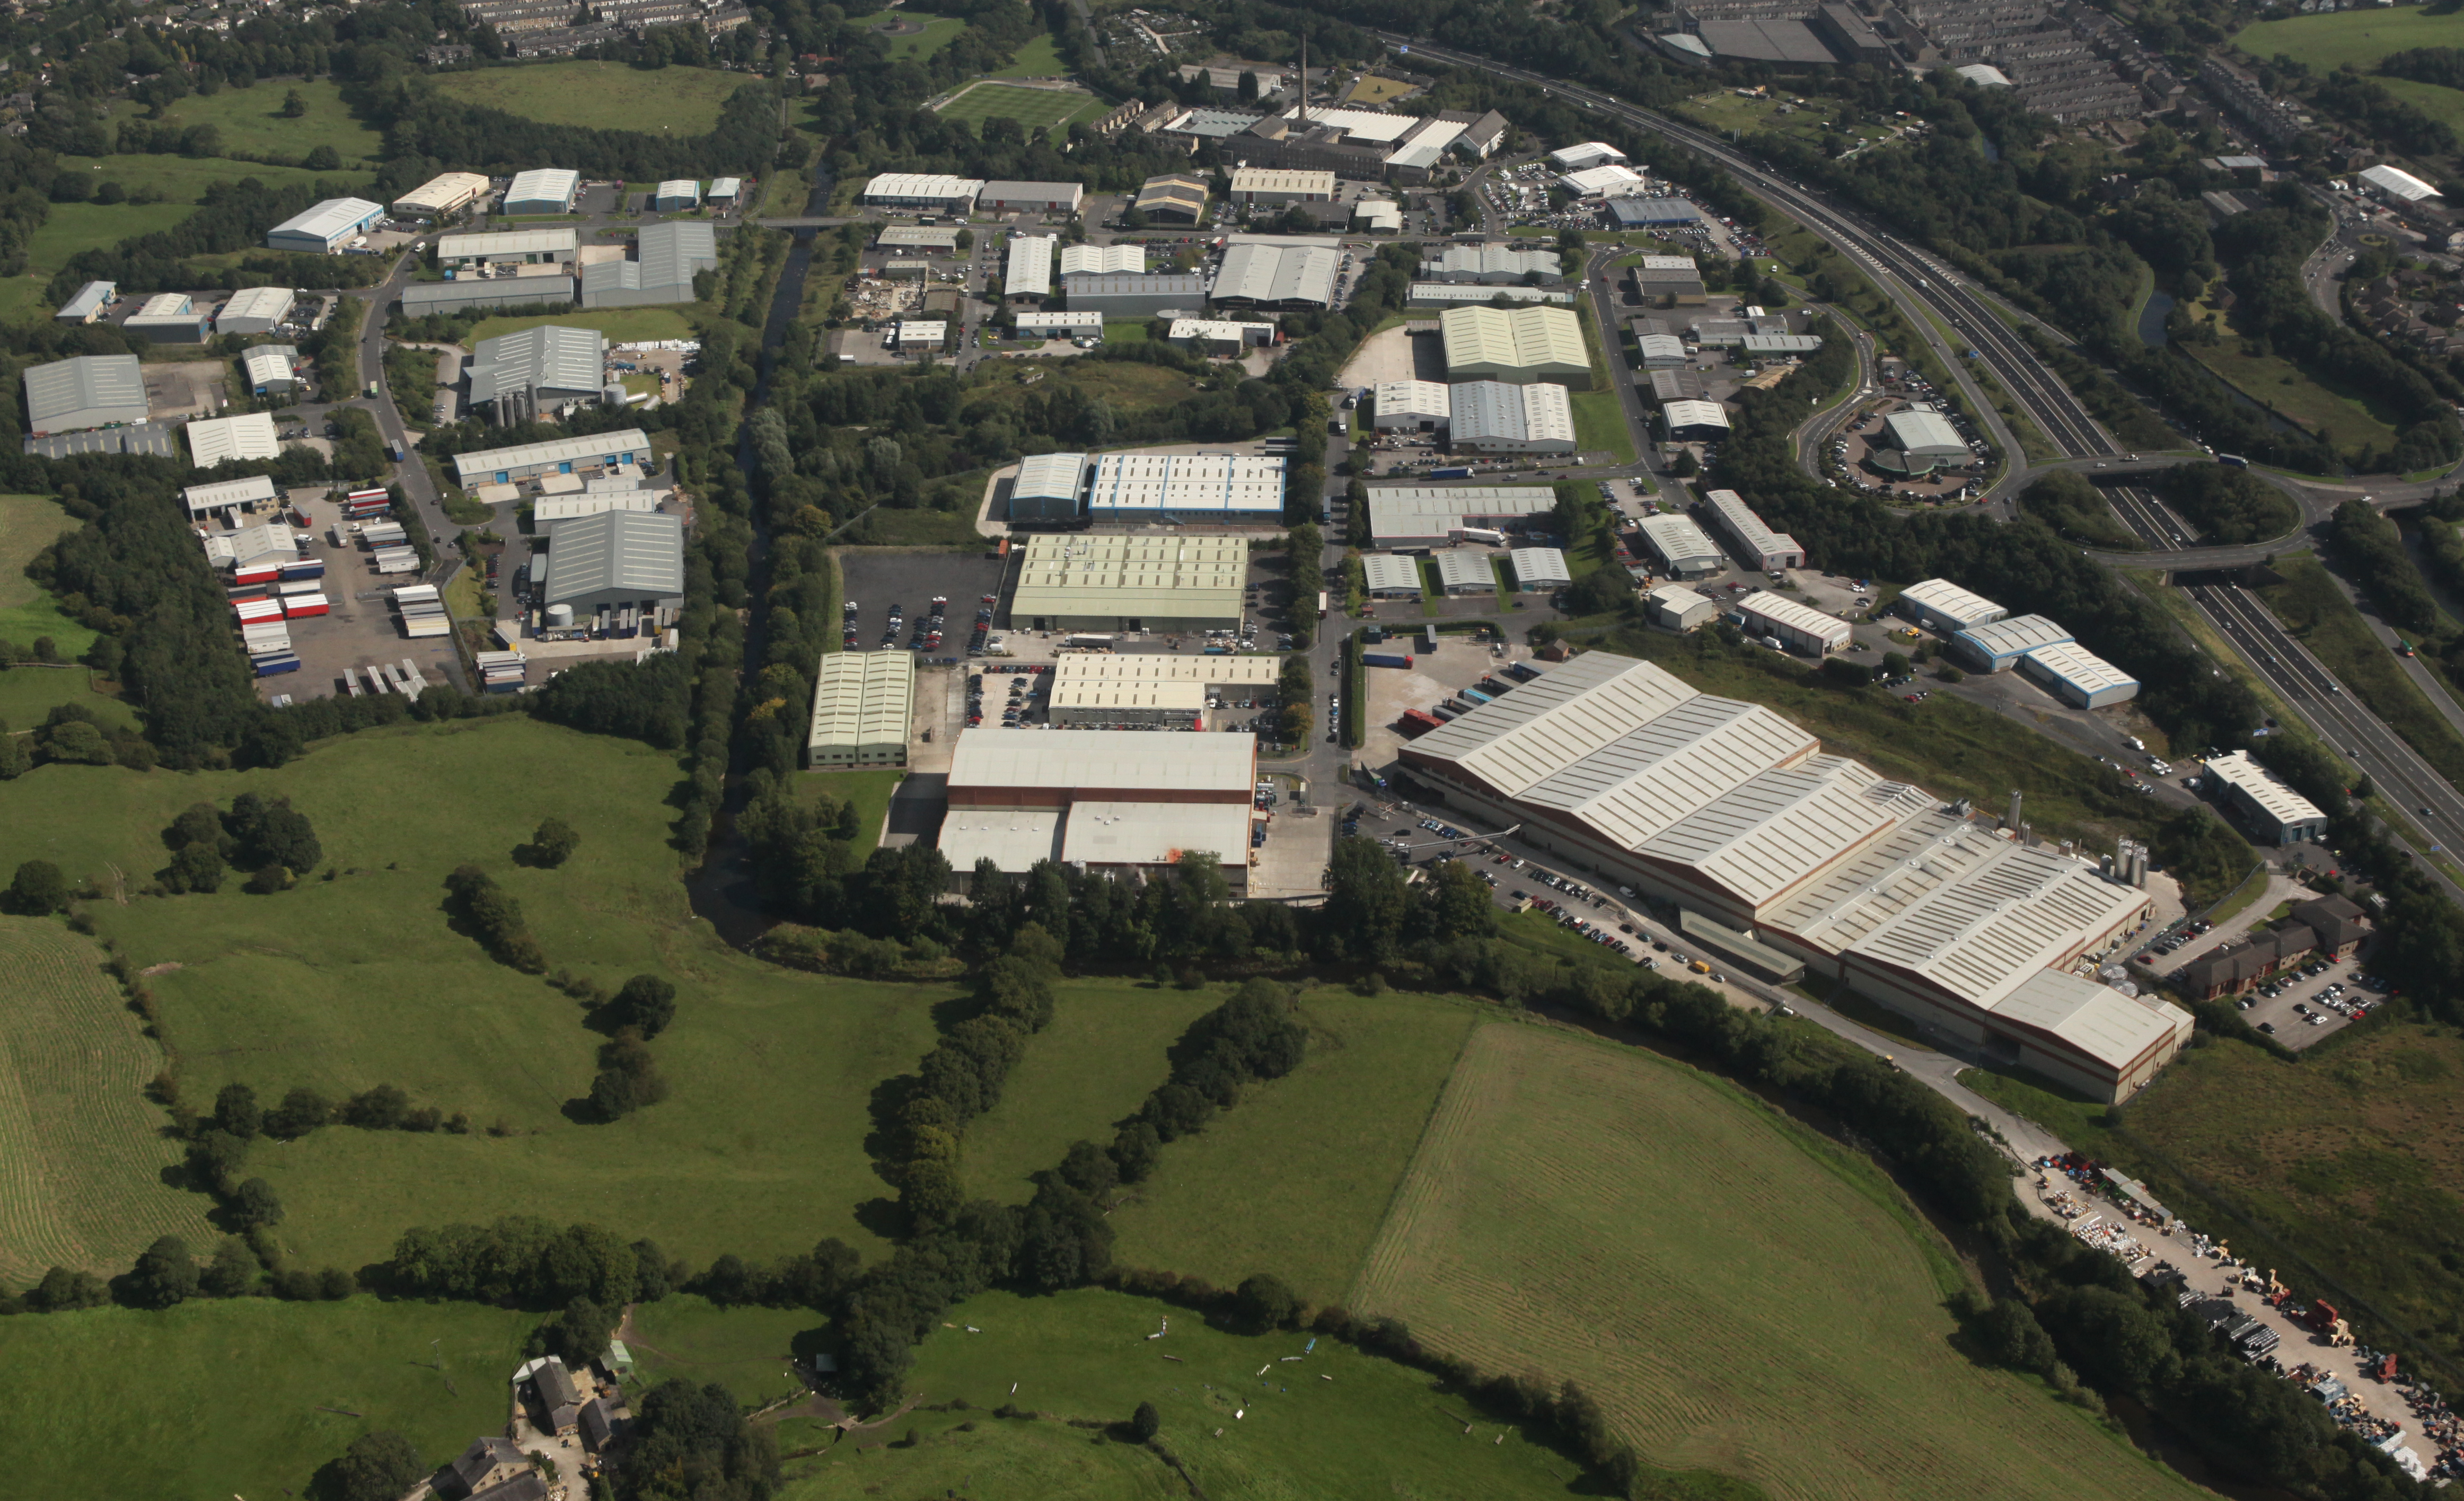 Lomeshaye Industrial Estate - permission to expand.